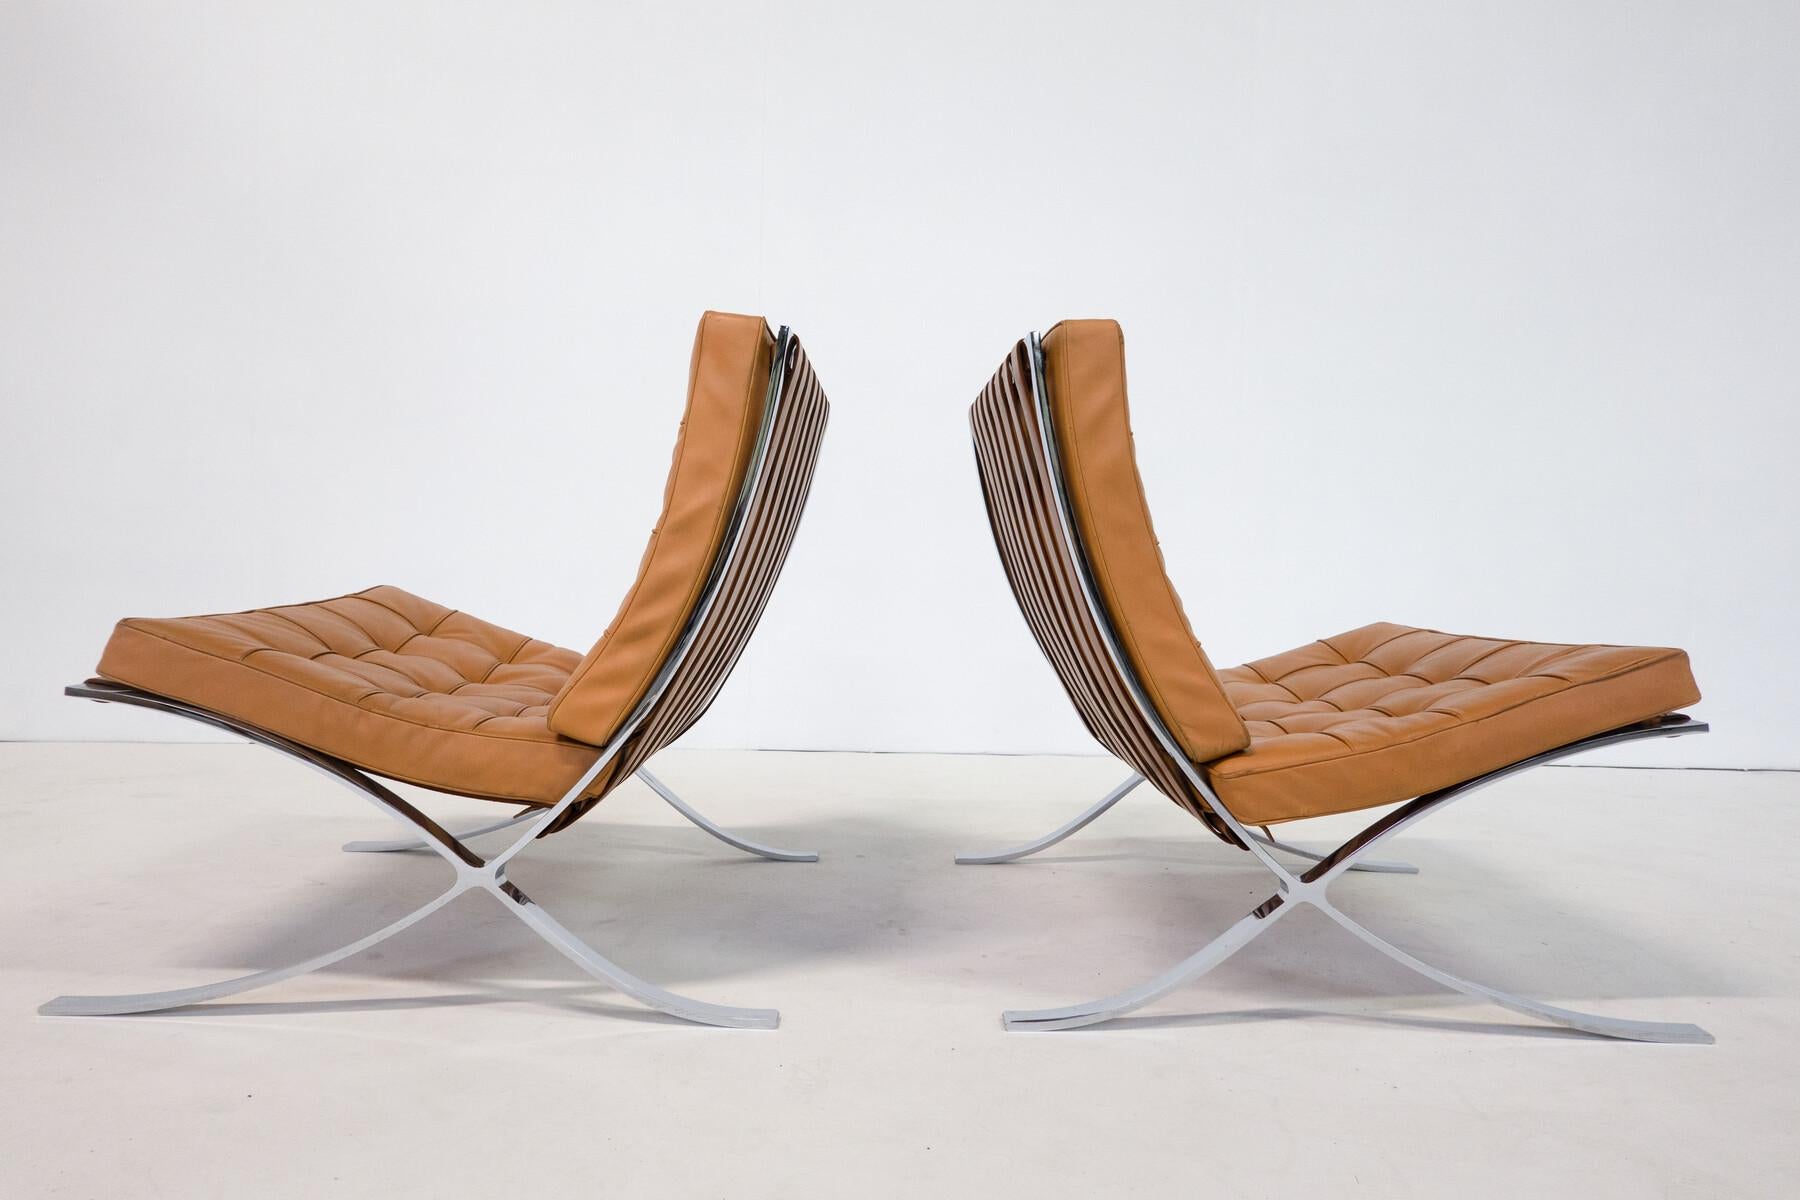 Pair of Cognac Leather Barcelona Chairs by Mies Van Der Rohe for Knoll, 1960s For Sale 7